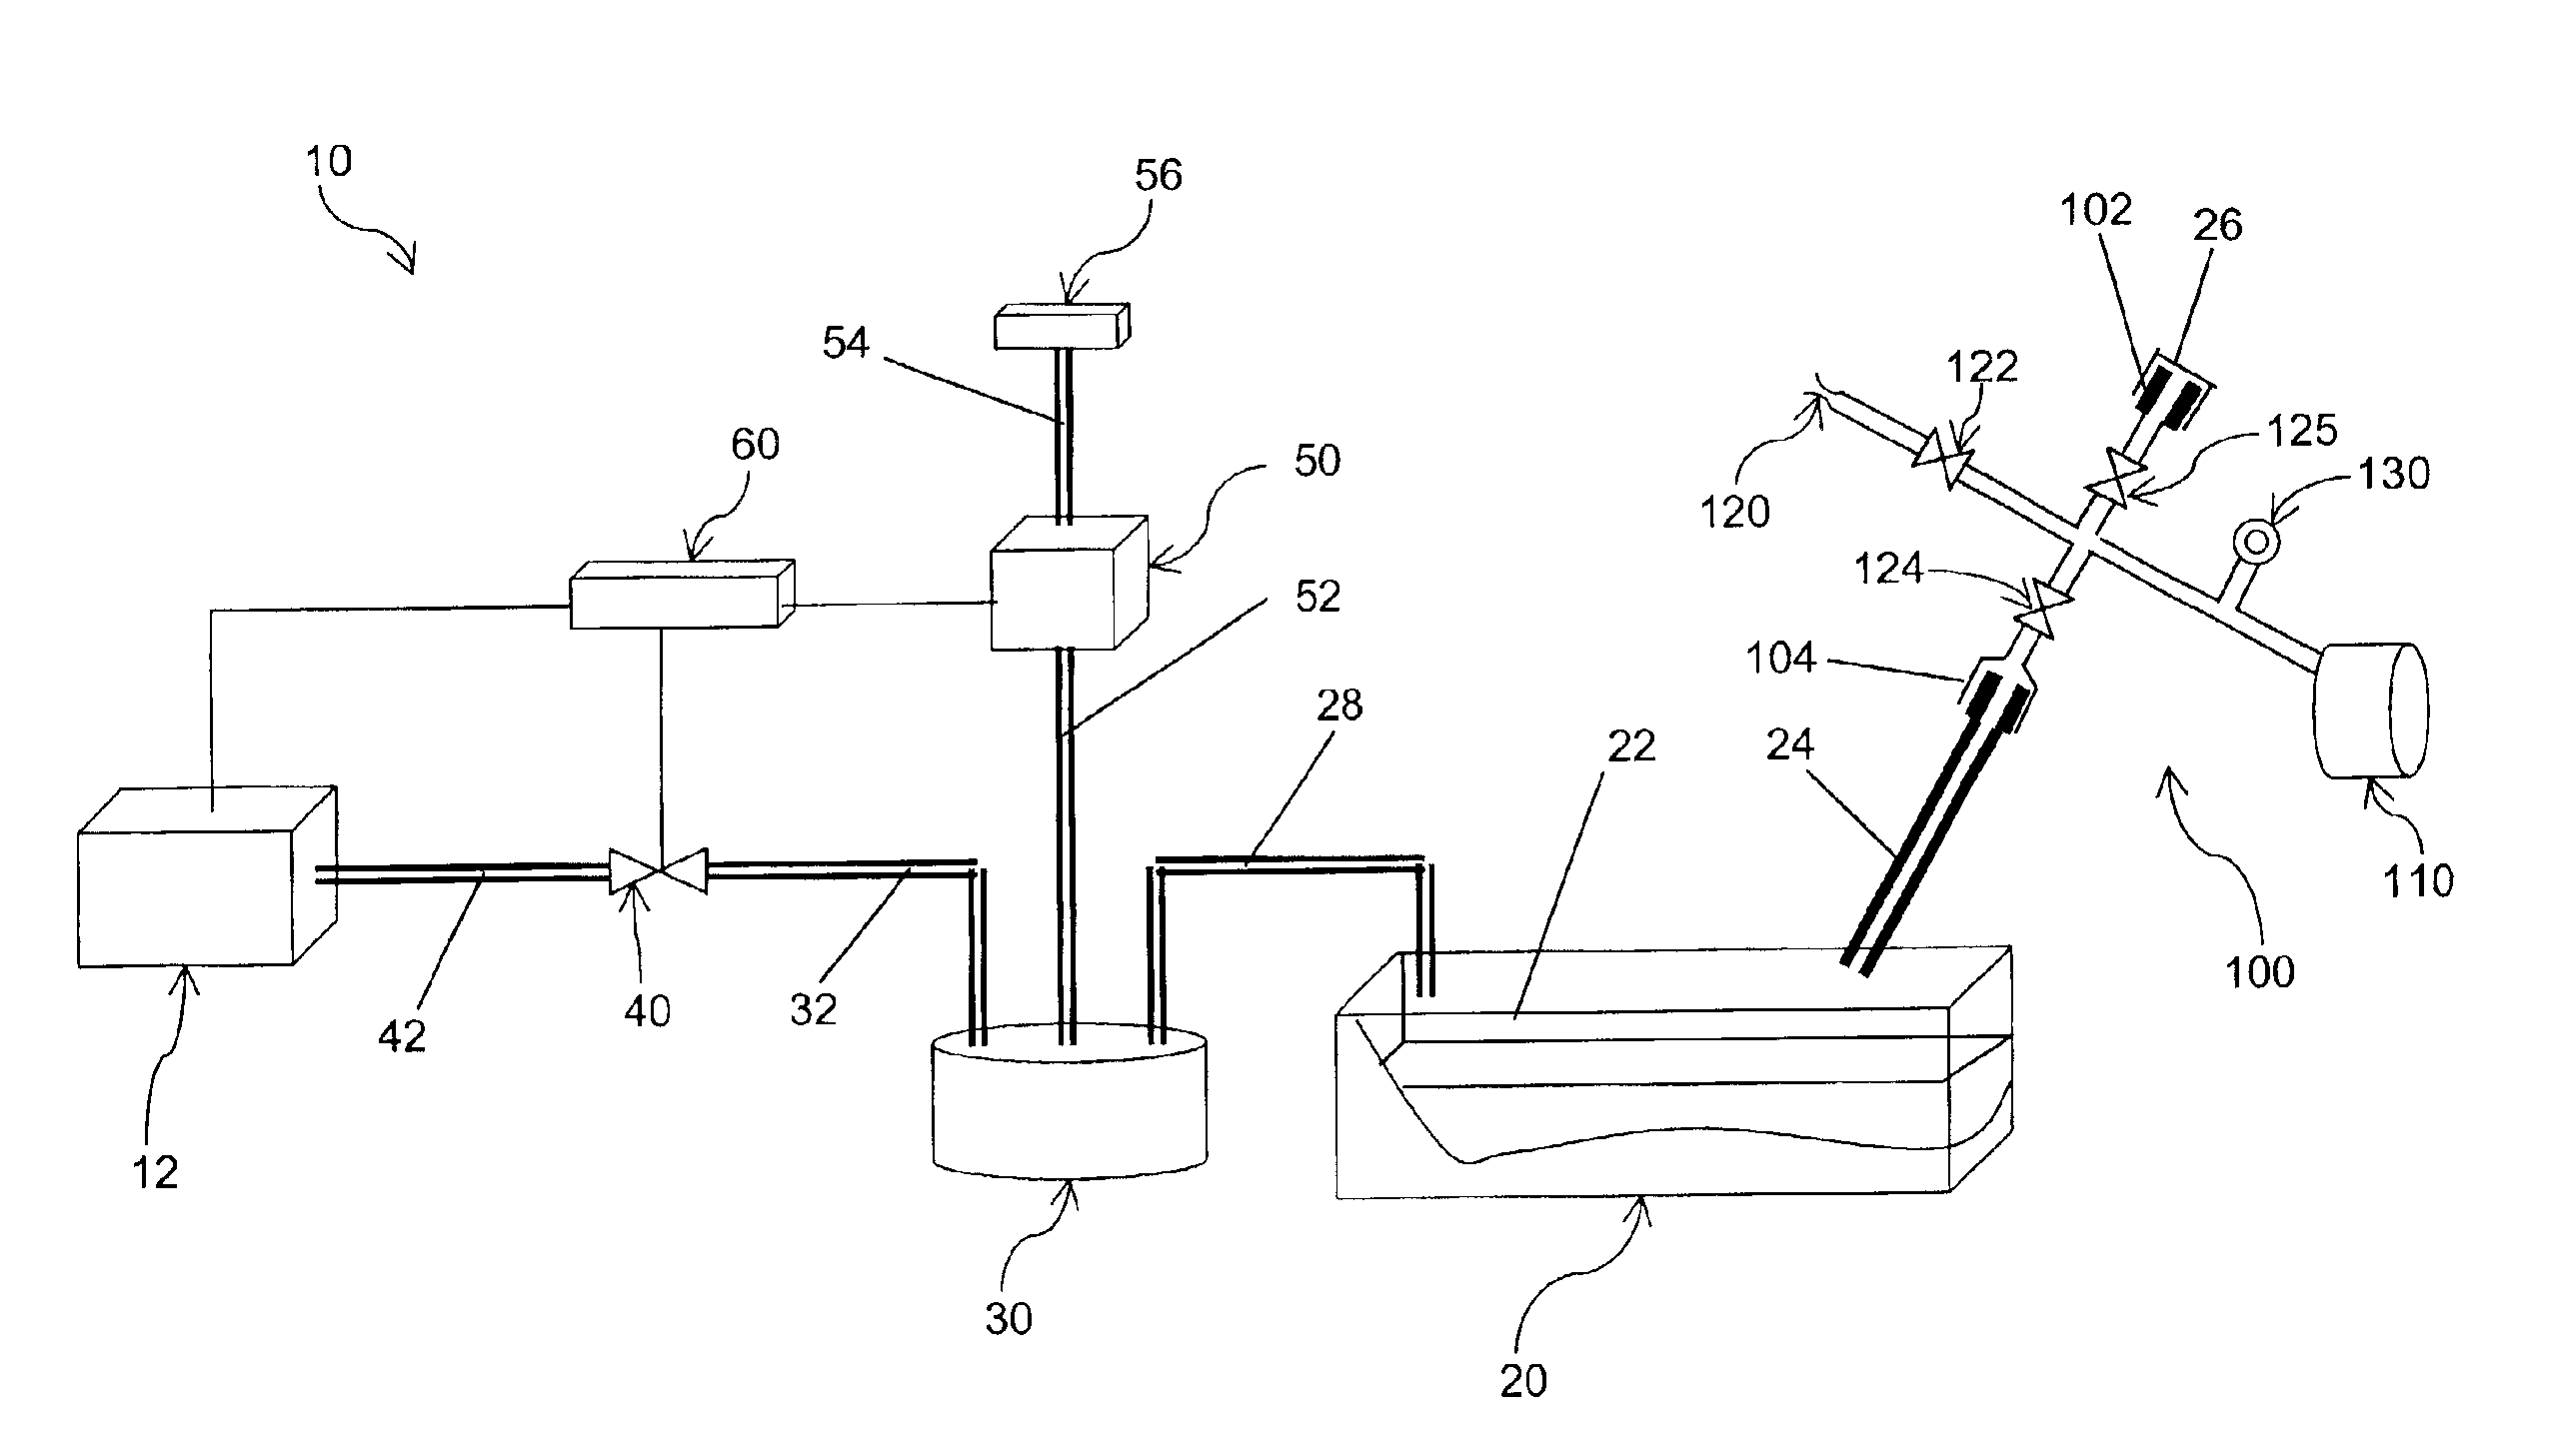 Diagnostic apparatus and method for an evaporative control system including an integrated pressure management apparatus